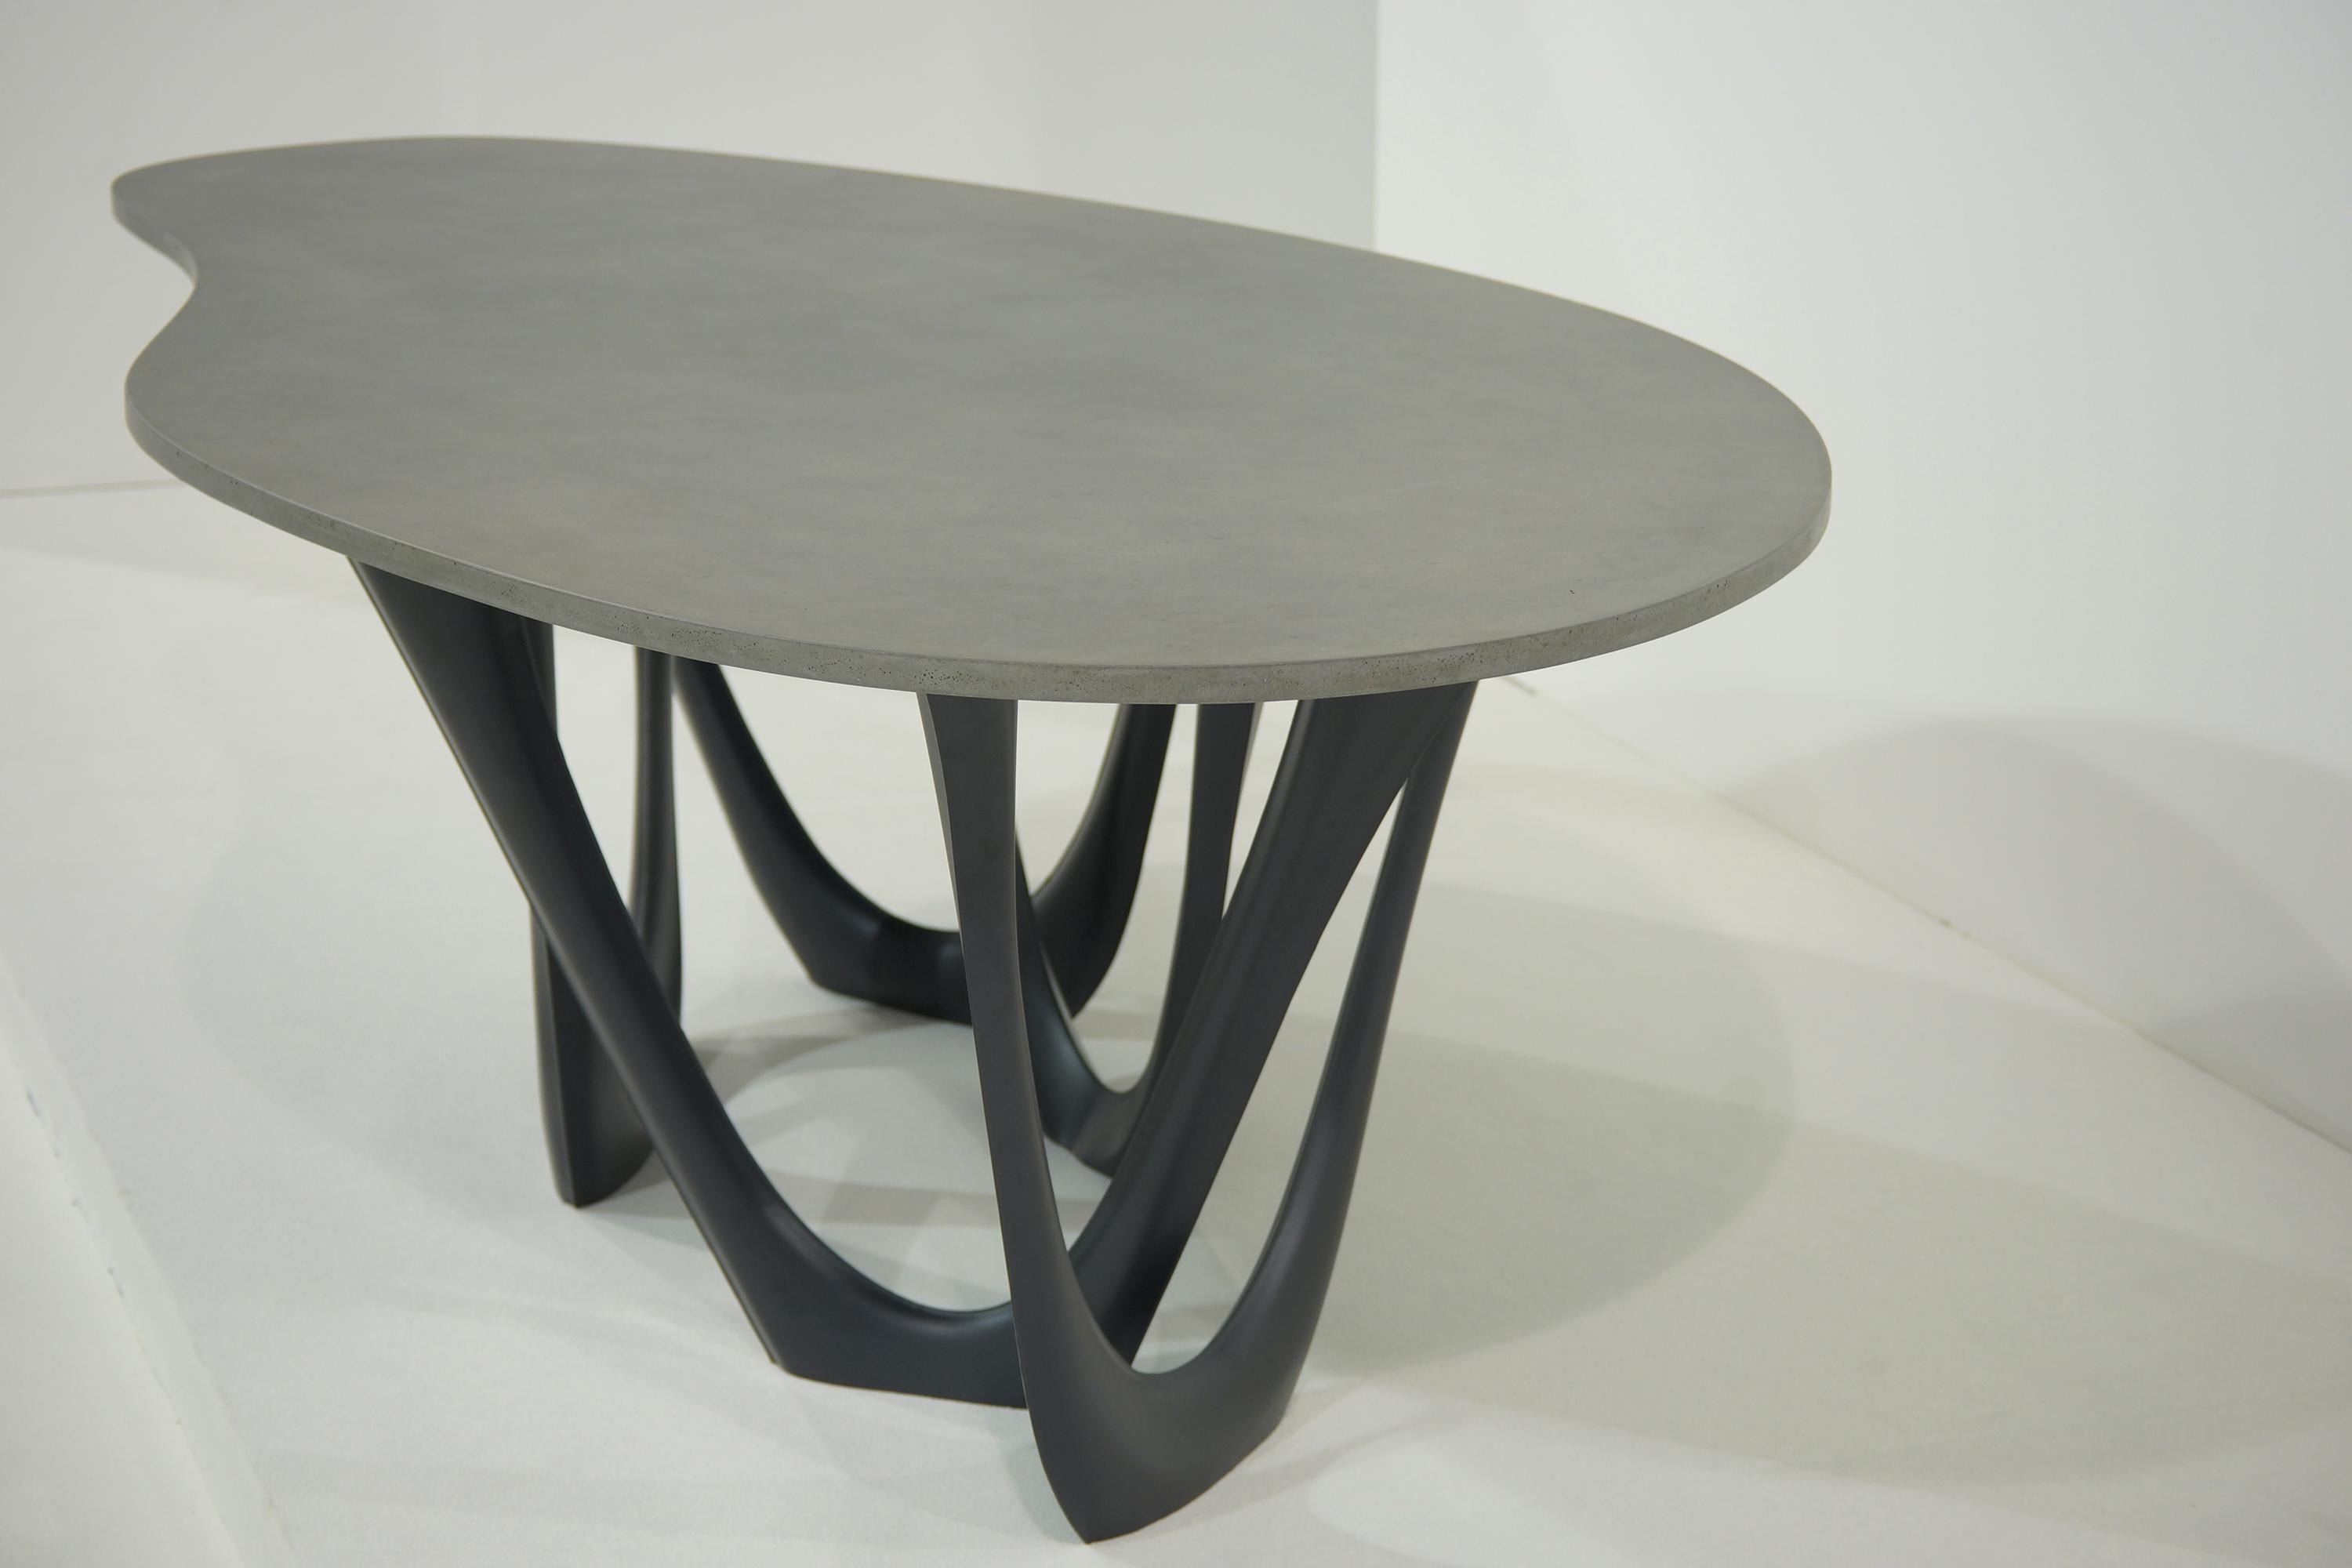 Powder-Coated Moss Grey Concrete Steel Sculptural G-Table by Zieta For Sale